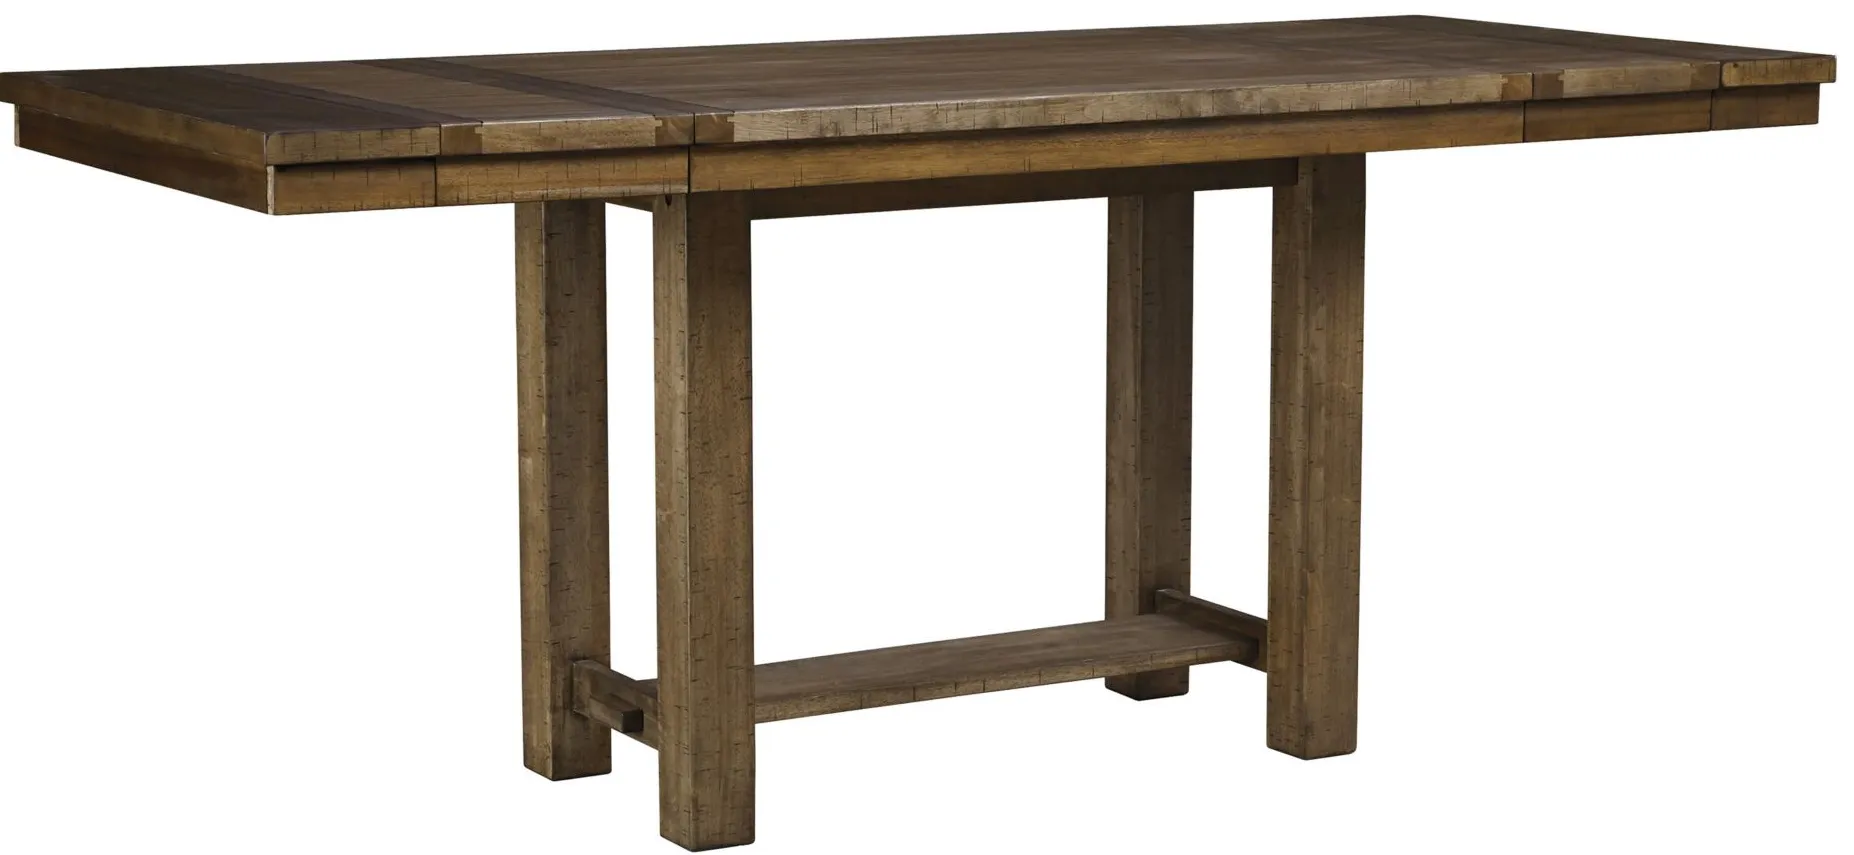 Montana Counter-Height Dining Table w/ Leaves in Grayish Brown by Ashley Furniture